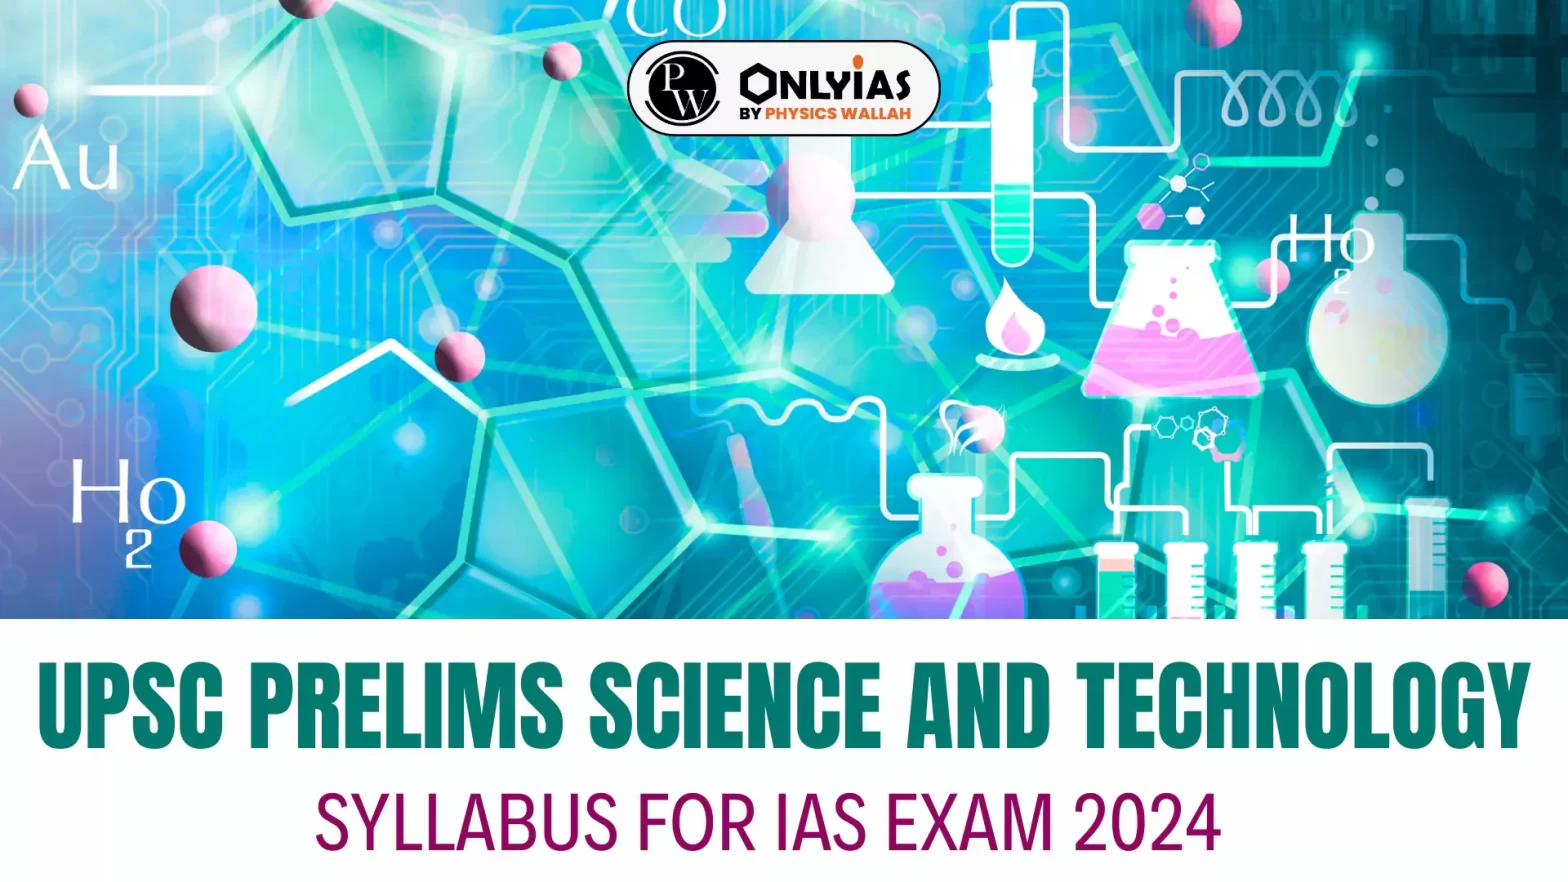 UPSC Prelims Science and Technology Syllabus for IAS Exam 2024